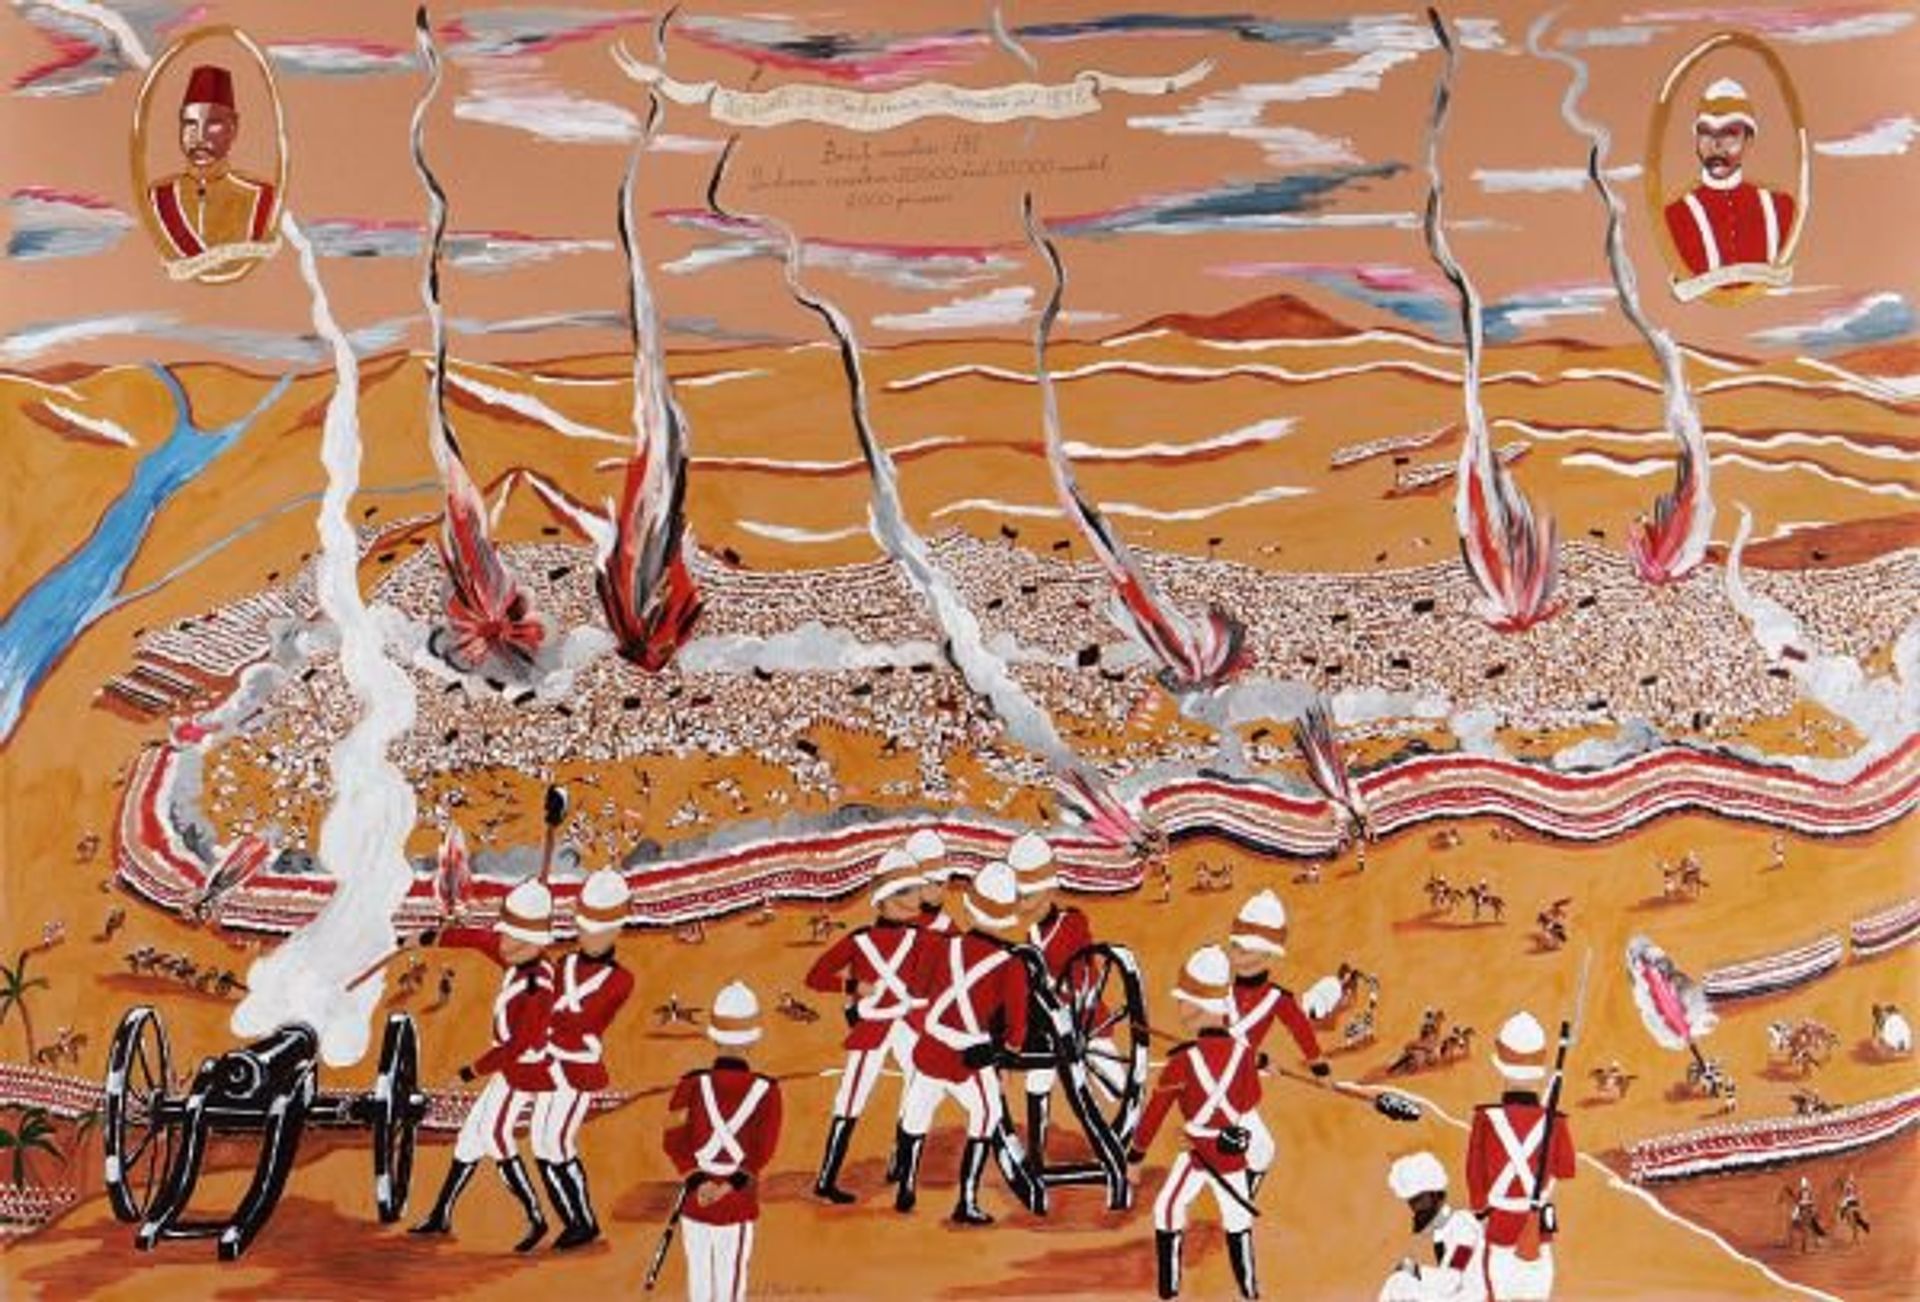 Andrew Gilbert, The Battle of Omdurman, 2nd September, 1898, 2012, acrylic, water colour and fineliner on paper, 70 × 100 cm